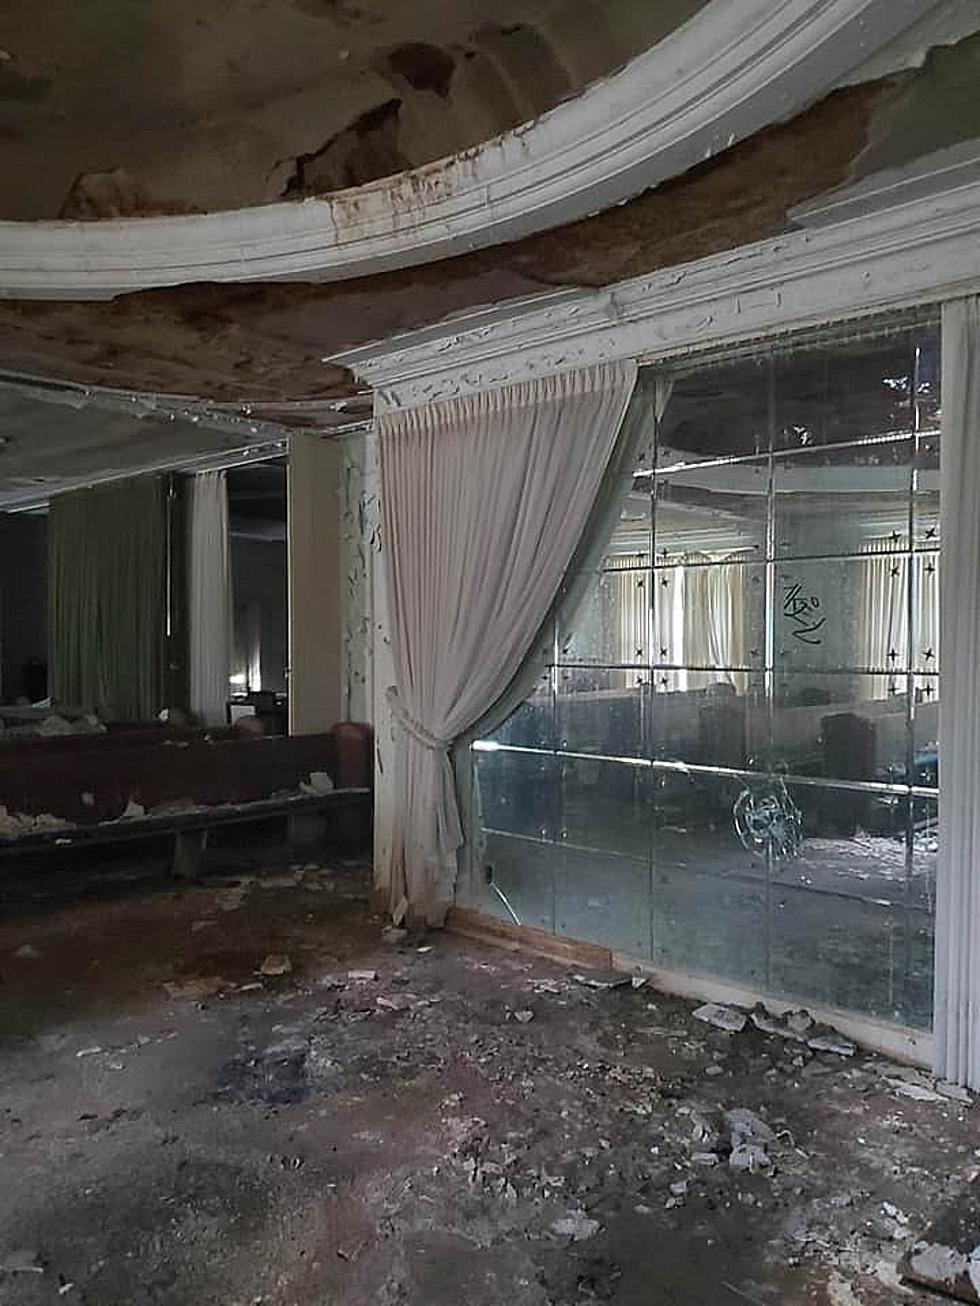 PHOTOS: Check Out The Inside of this Abandoned Flint Funeral Home